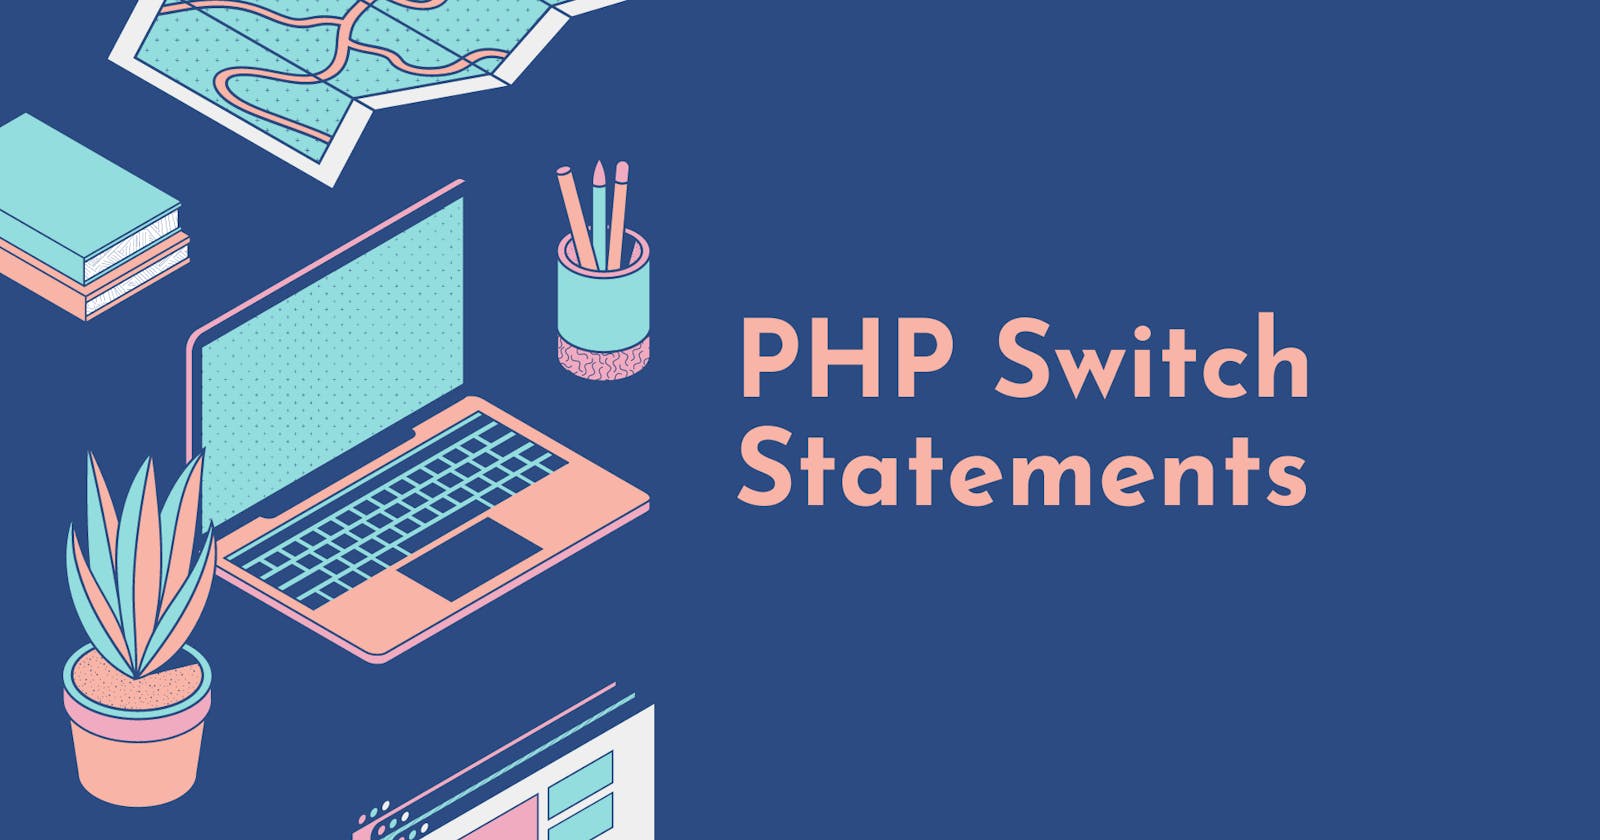 PHP Switch Statements